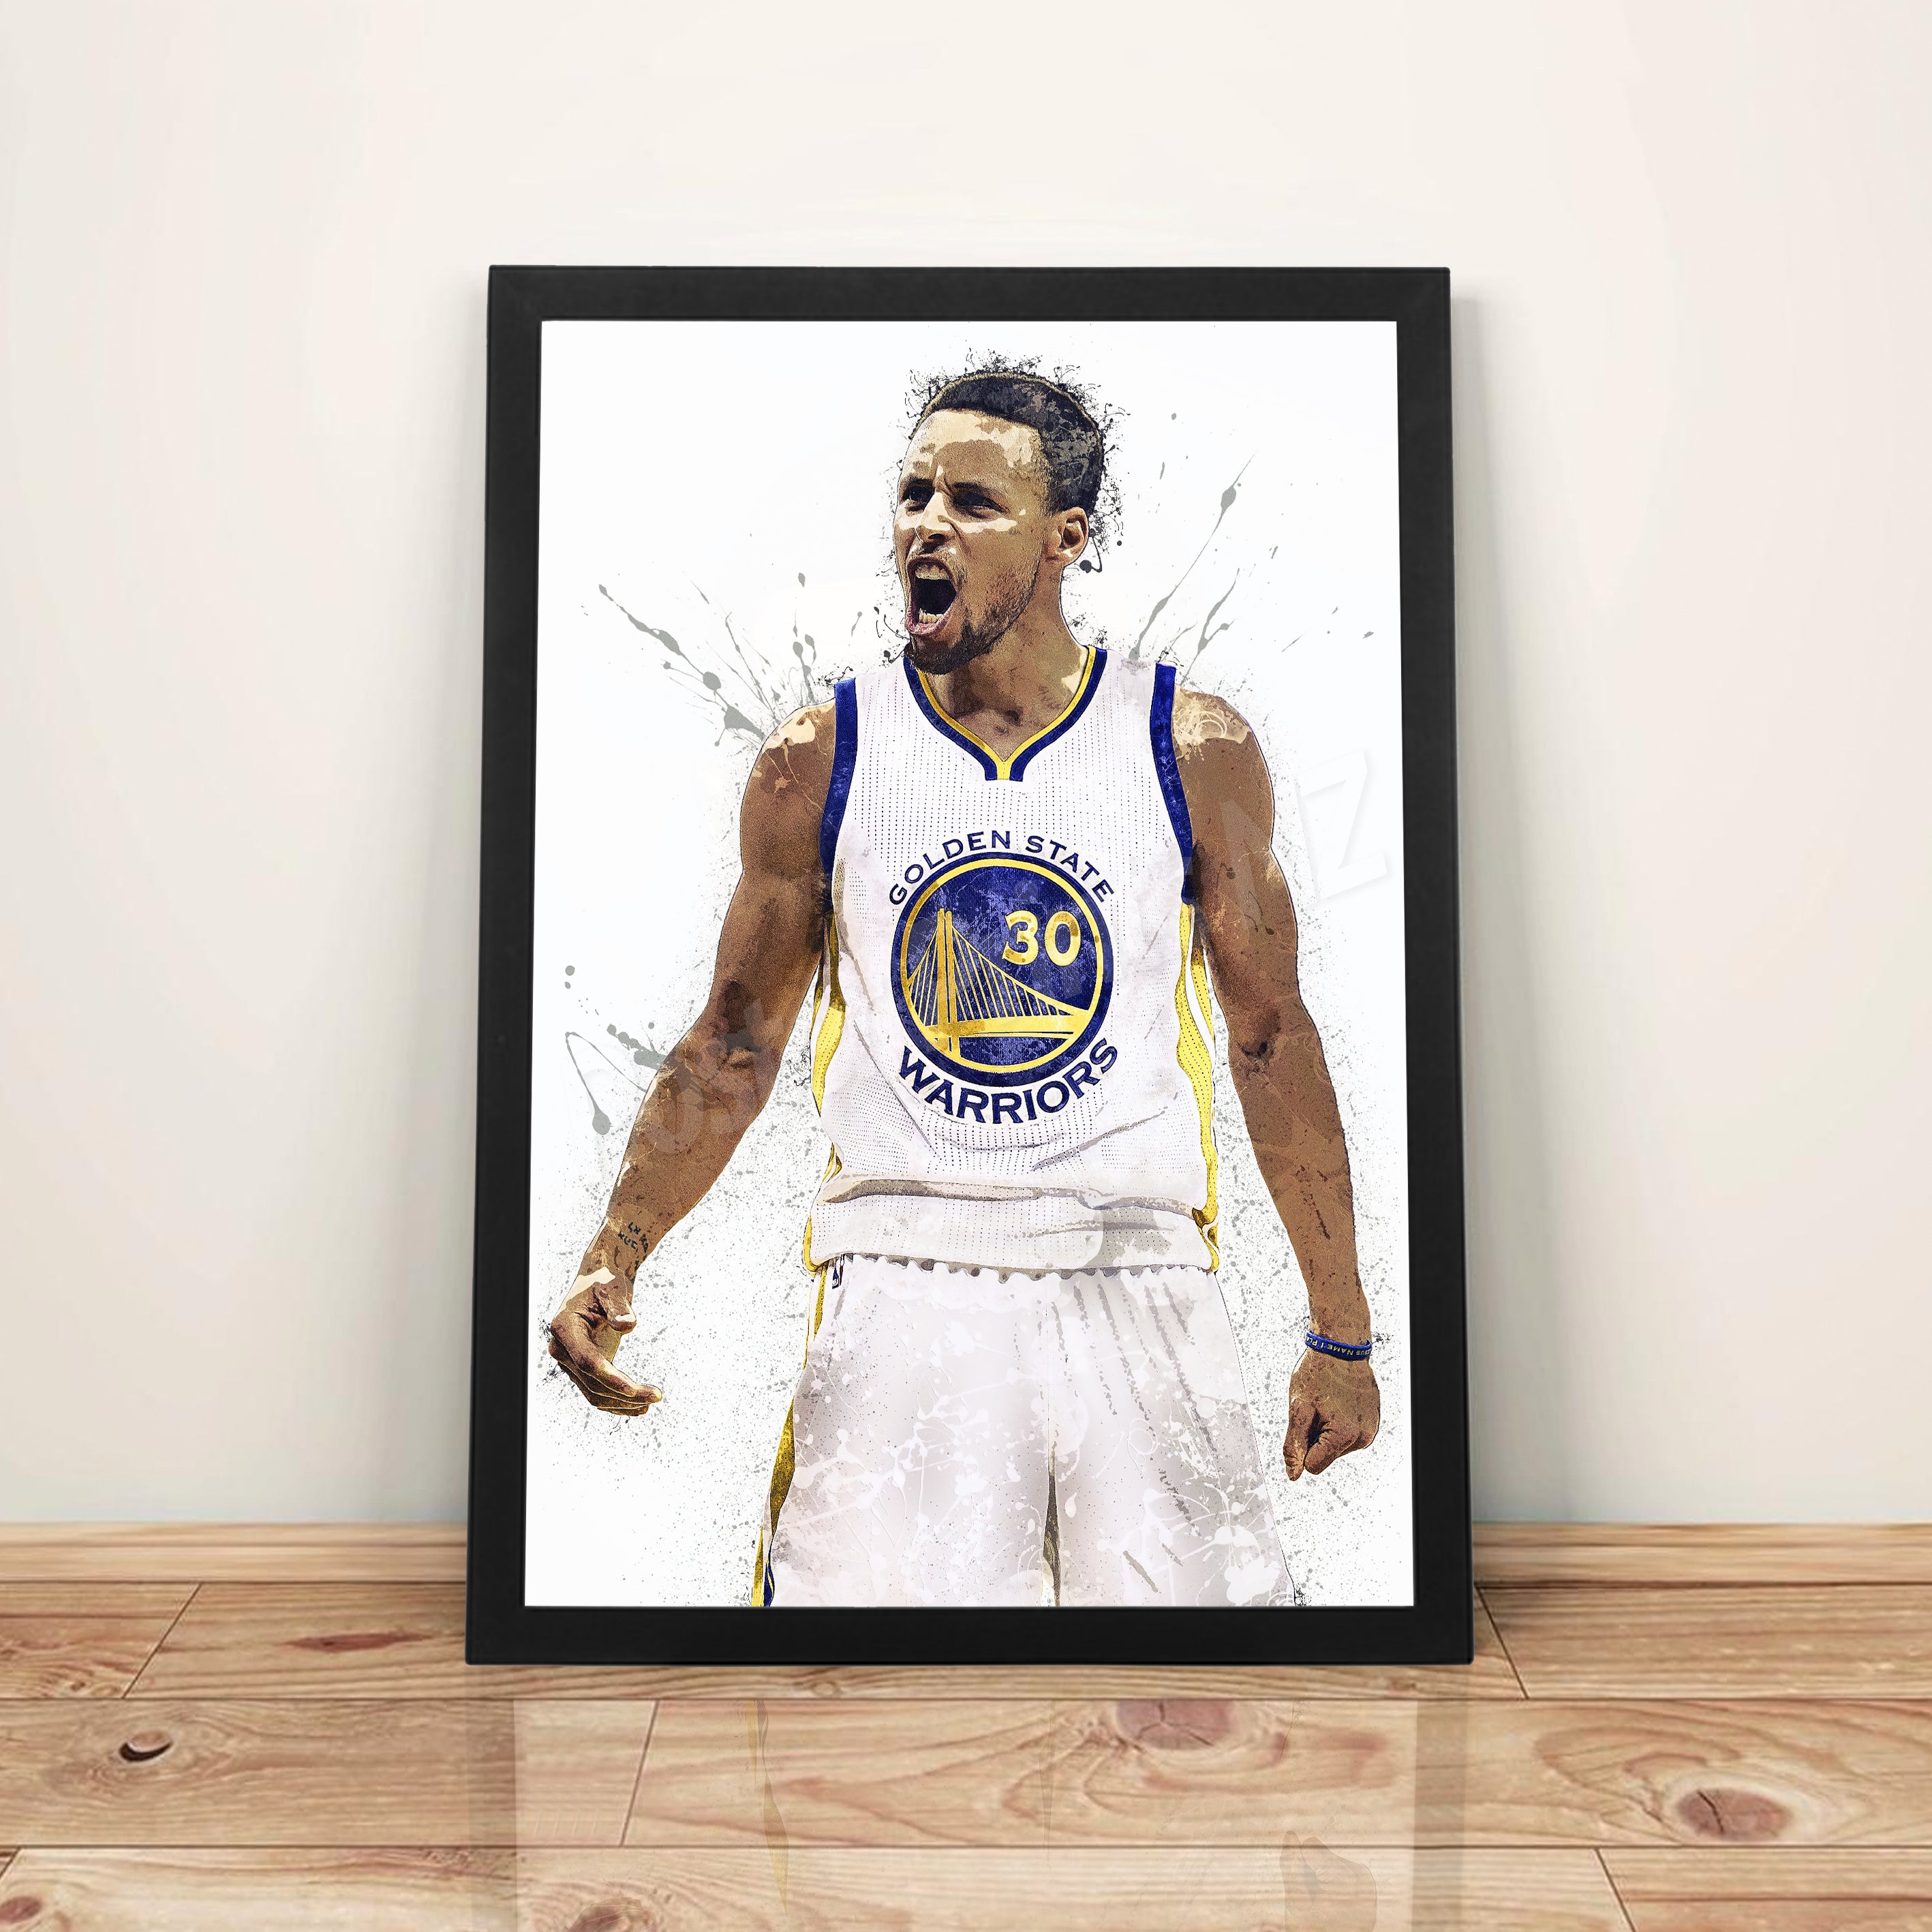 S. Curry - A3 Framed Art Poster